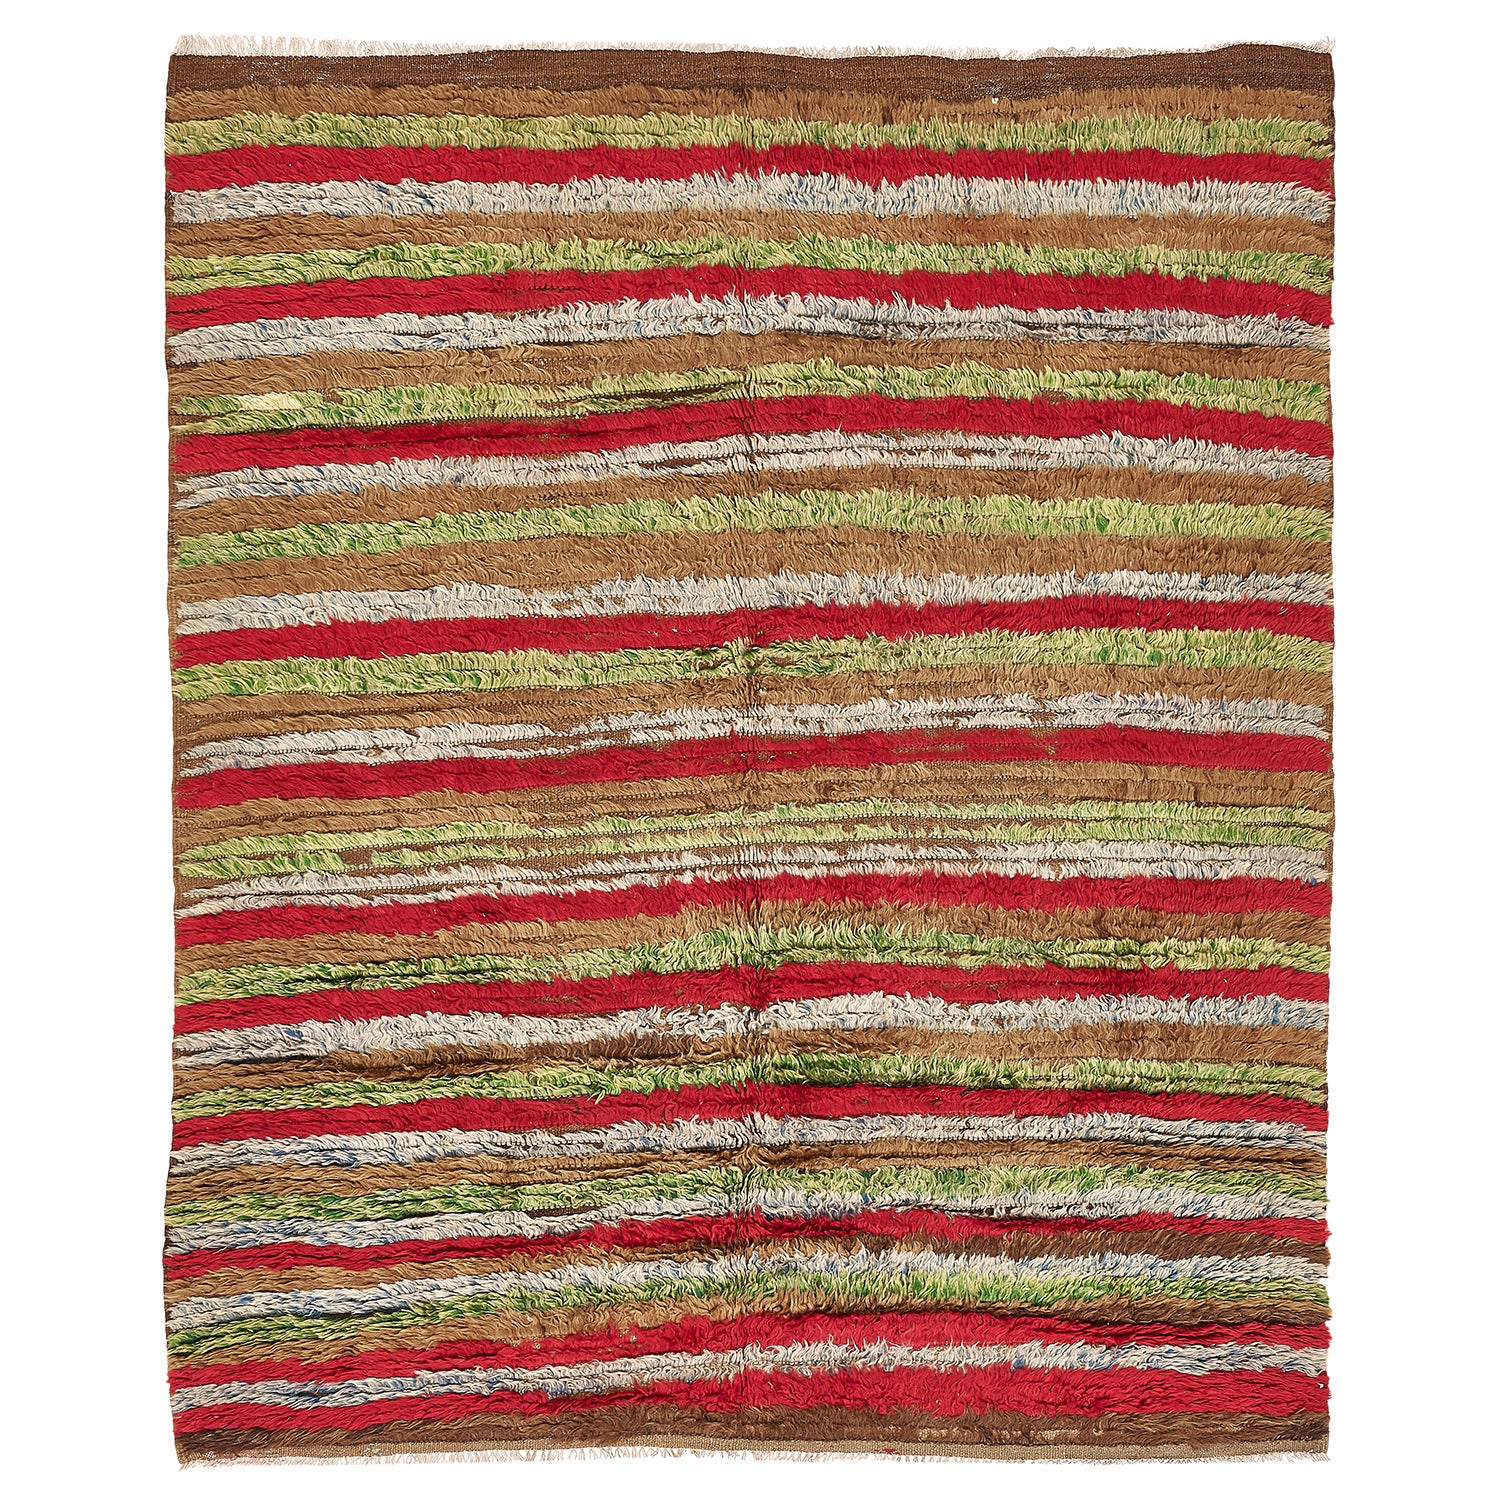 Vibrant and textured striped textile with uneven edges and raised ridges